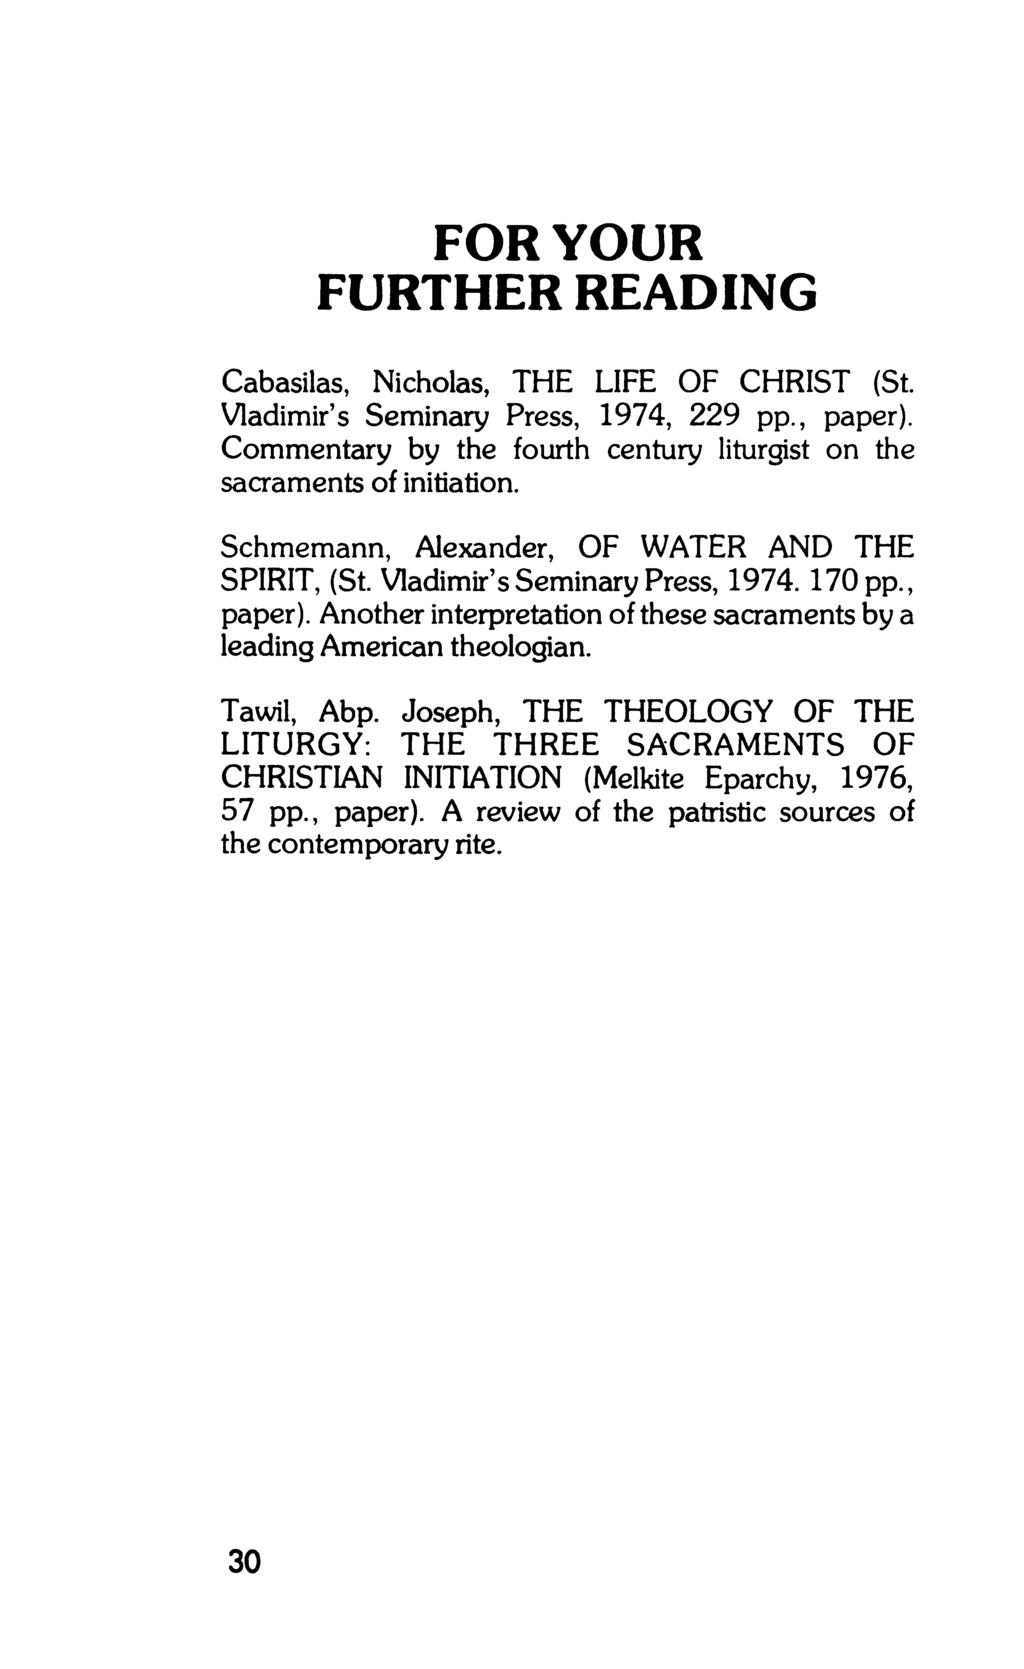 FOR YOUR FURTHER READING Cabasilas, Nicholas, THE LIFE OF CHRIST (St. Vladimir s Seminary Press, 1974, 229 pp., paper). Commentary by the fourth century liturgist on the sacraments of initiation.